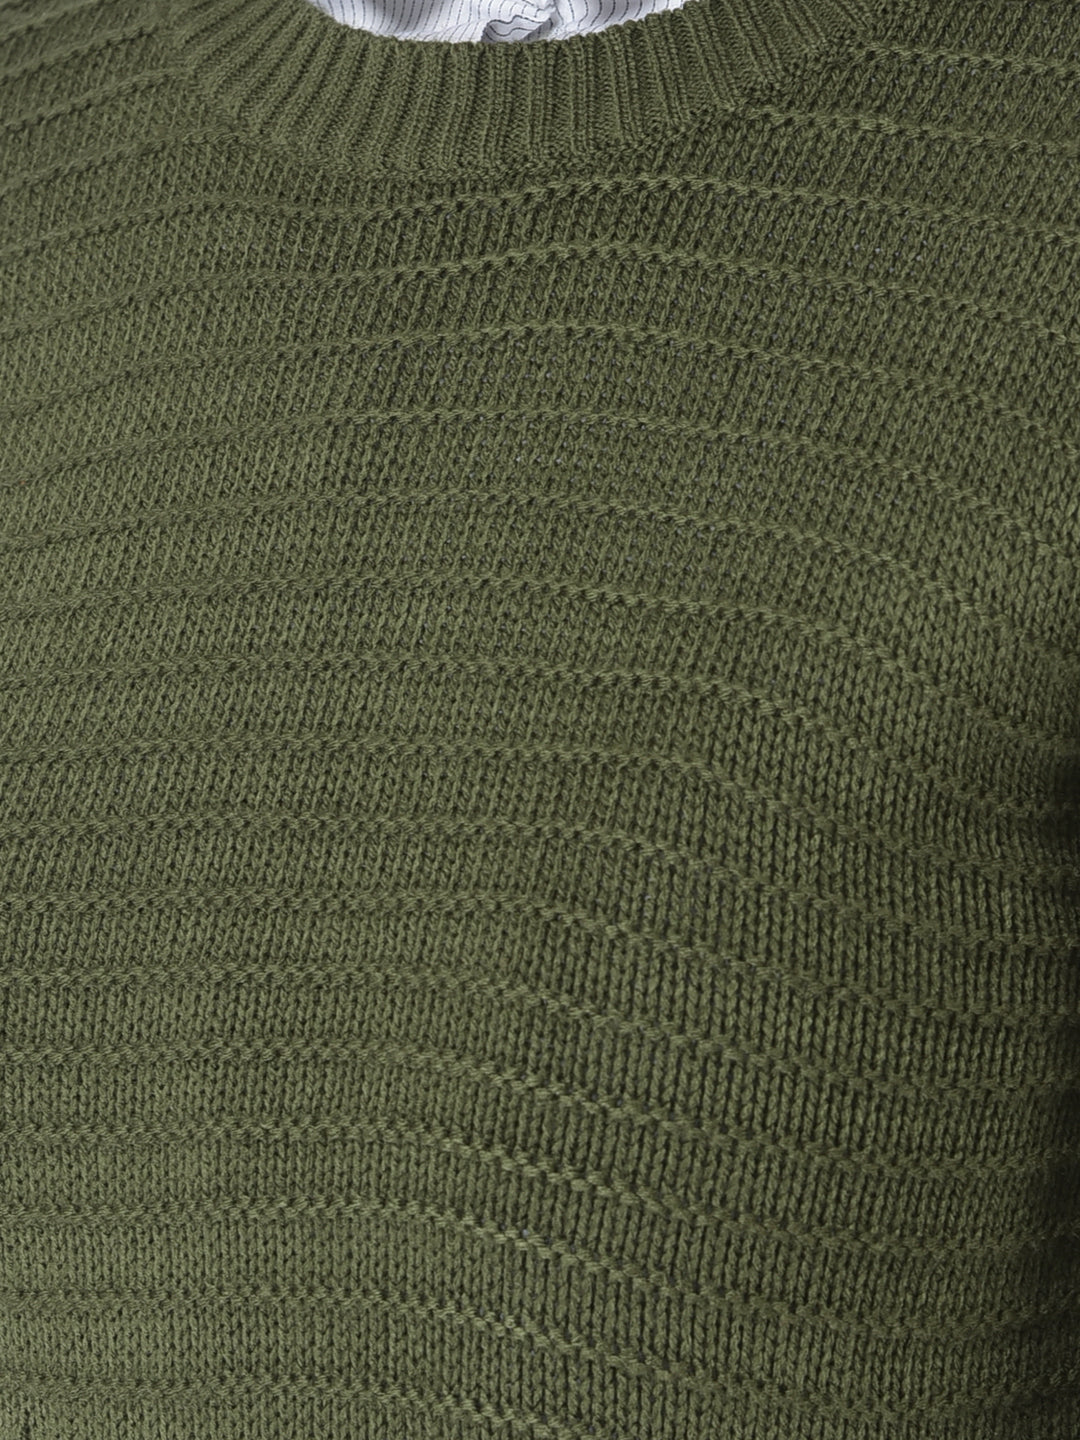  Olive Green Fitted Sweater